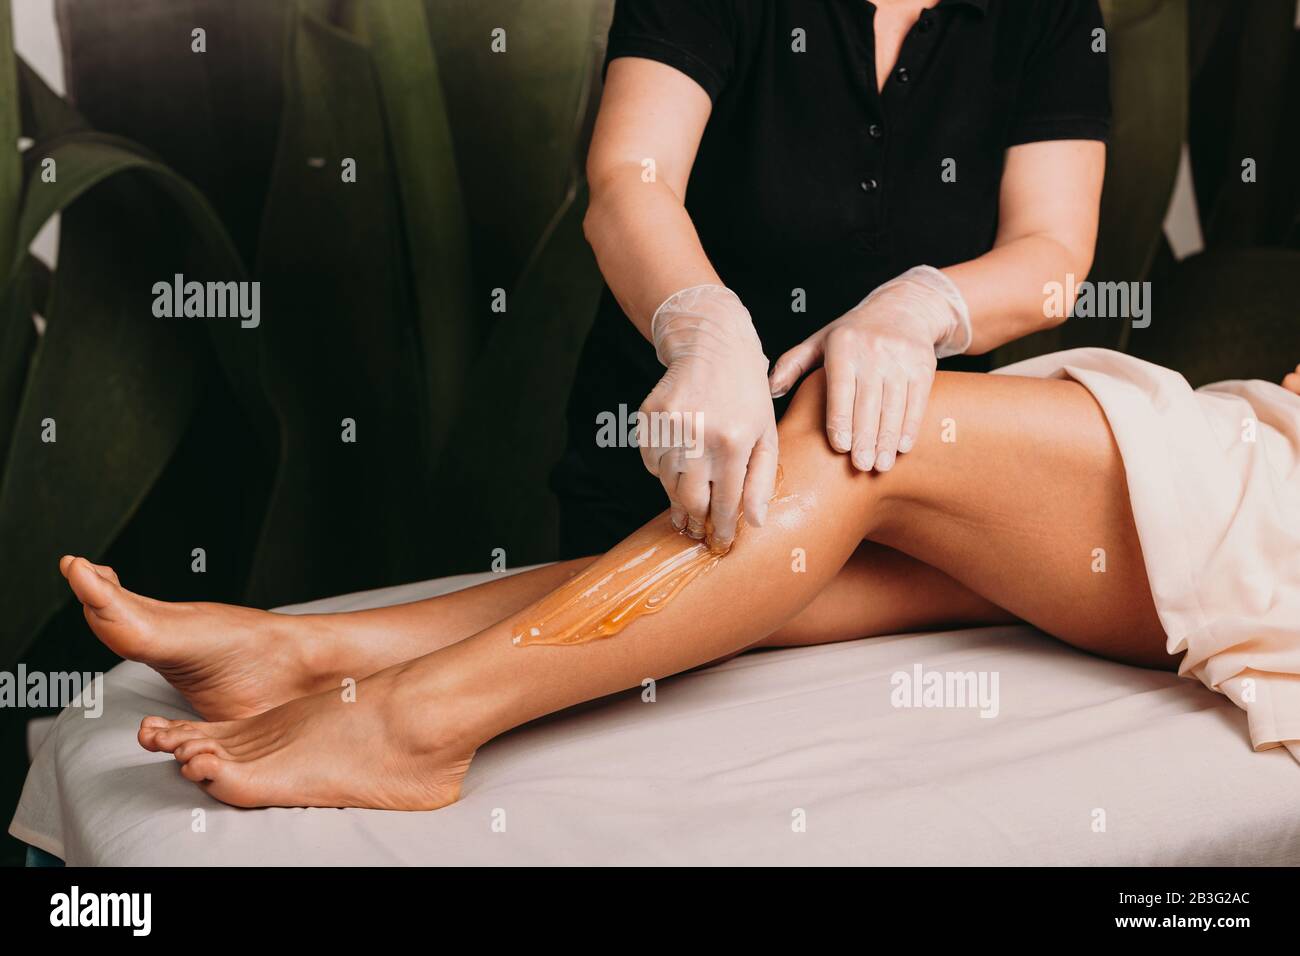 Caucasian lady with beautiful legs is having a sugar epilation during a professional spa procedure Stock Photo